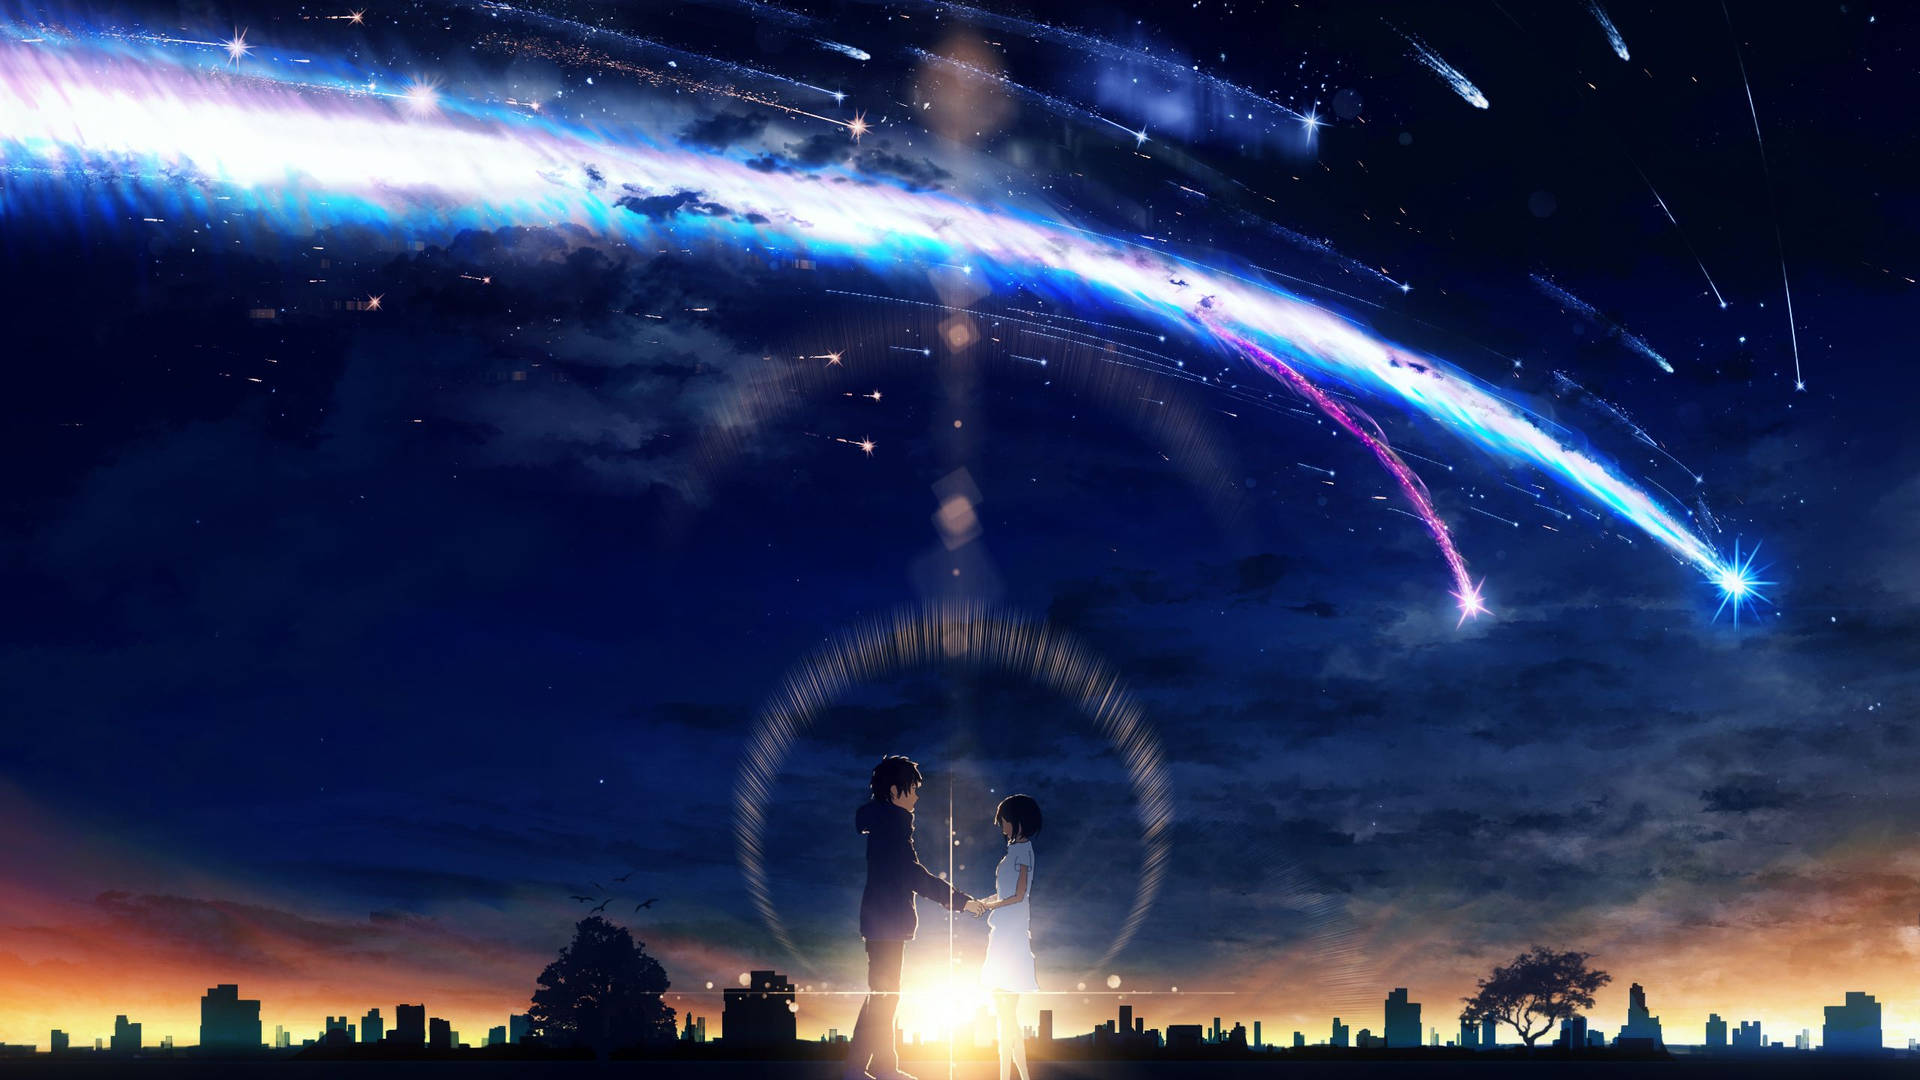 Beautiful Illustration From Your Name Anime Background